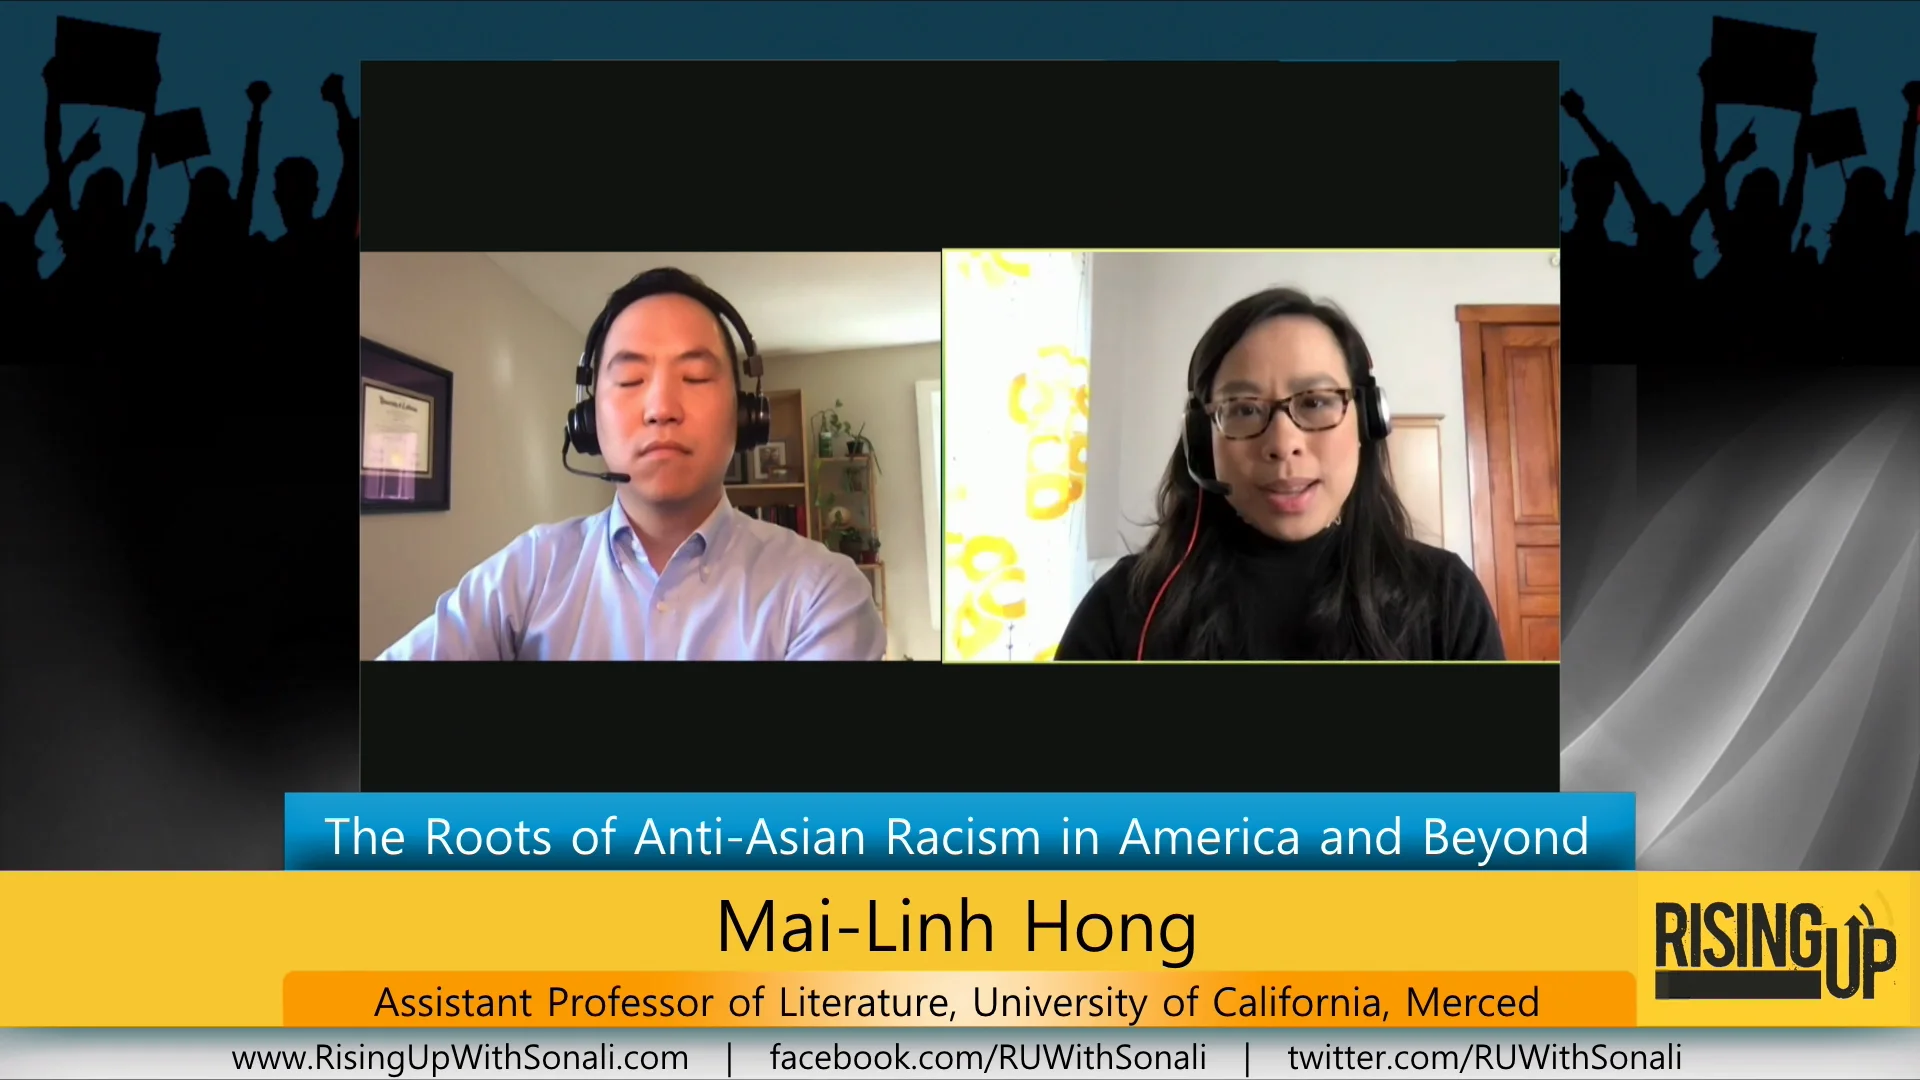 The Roots of Anti-Asian Racism in America and Beyond